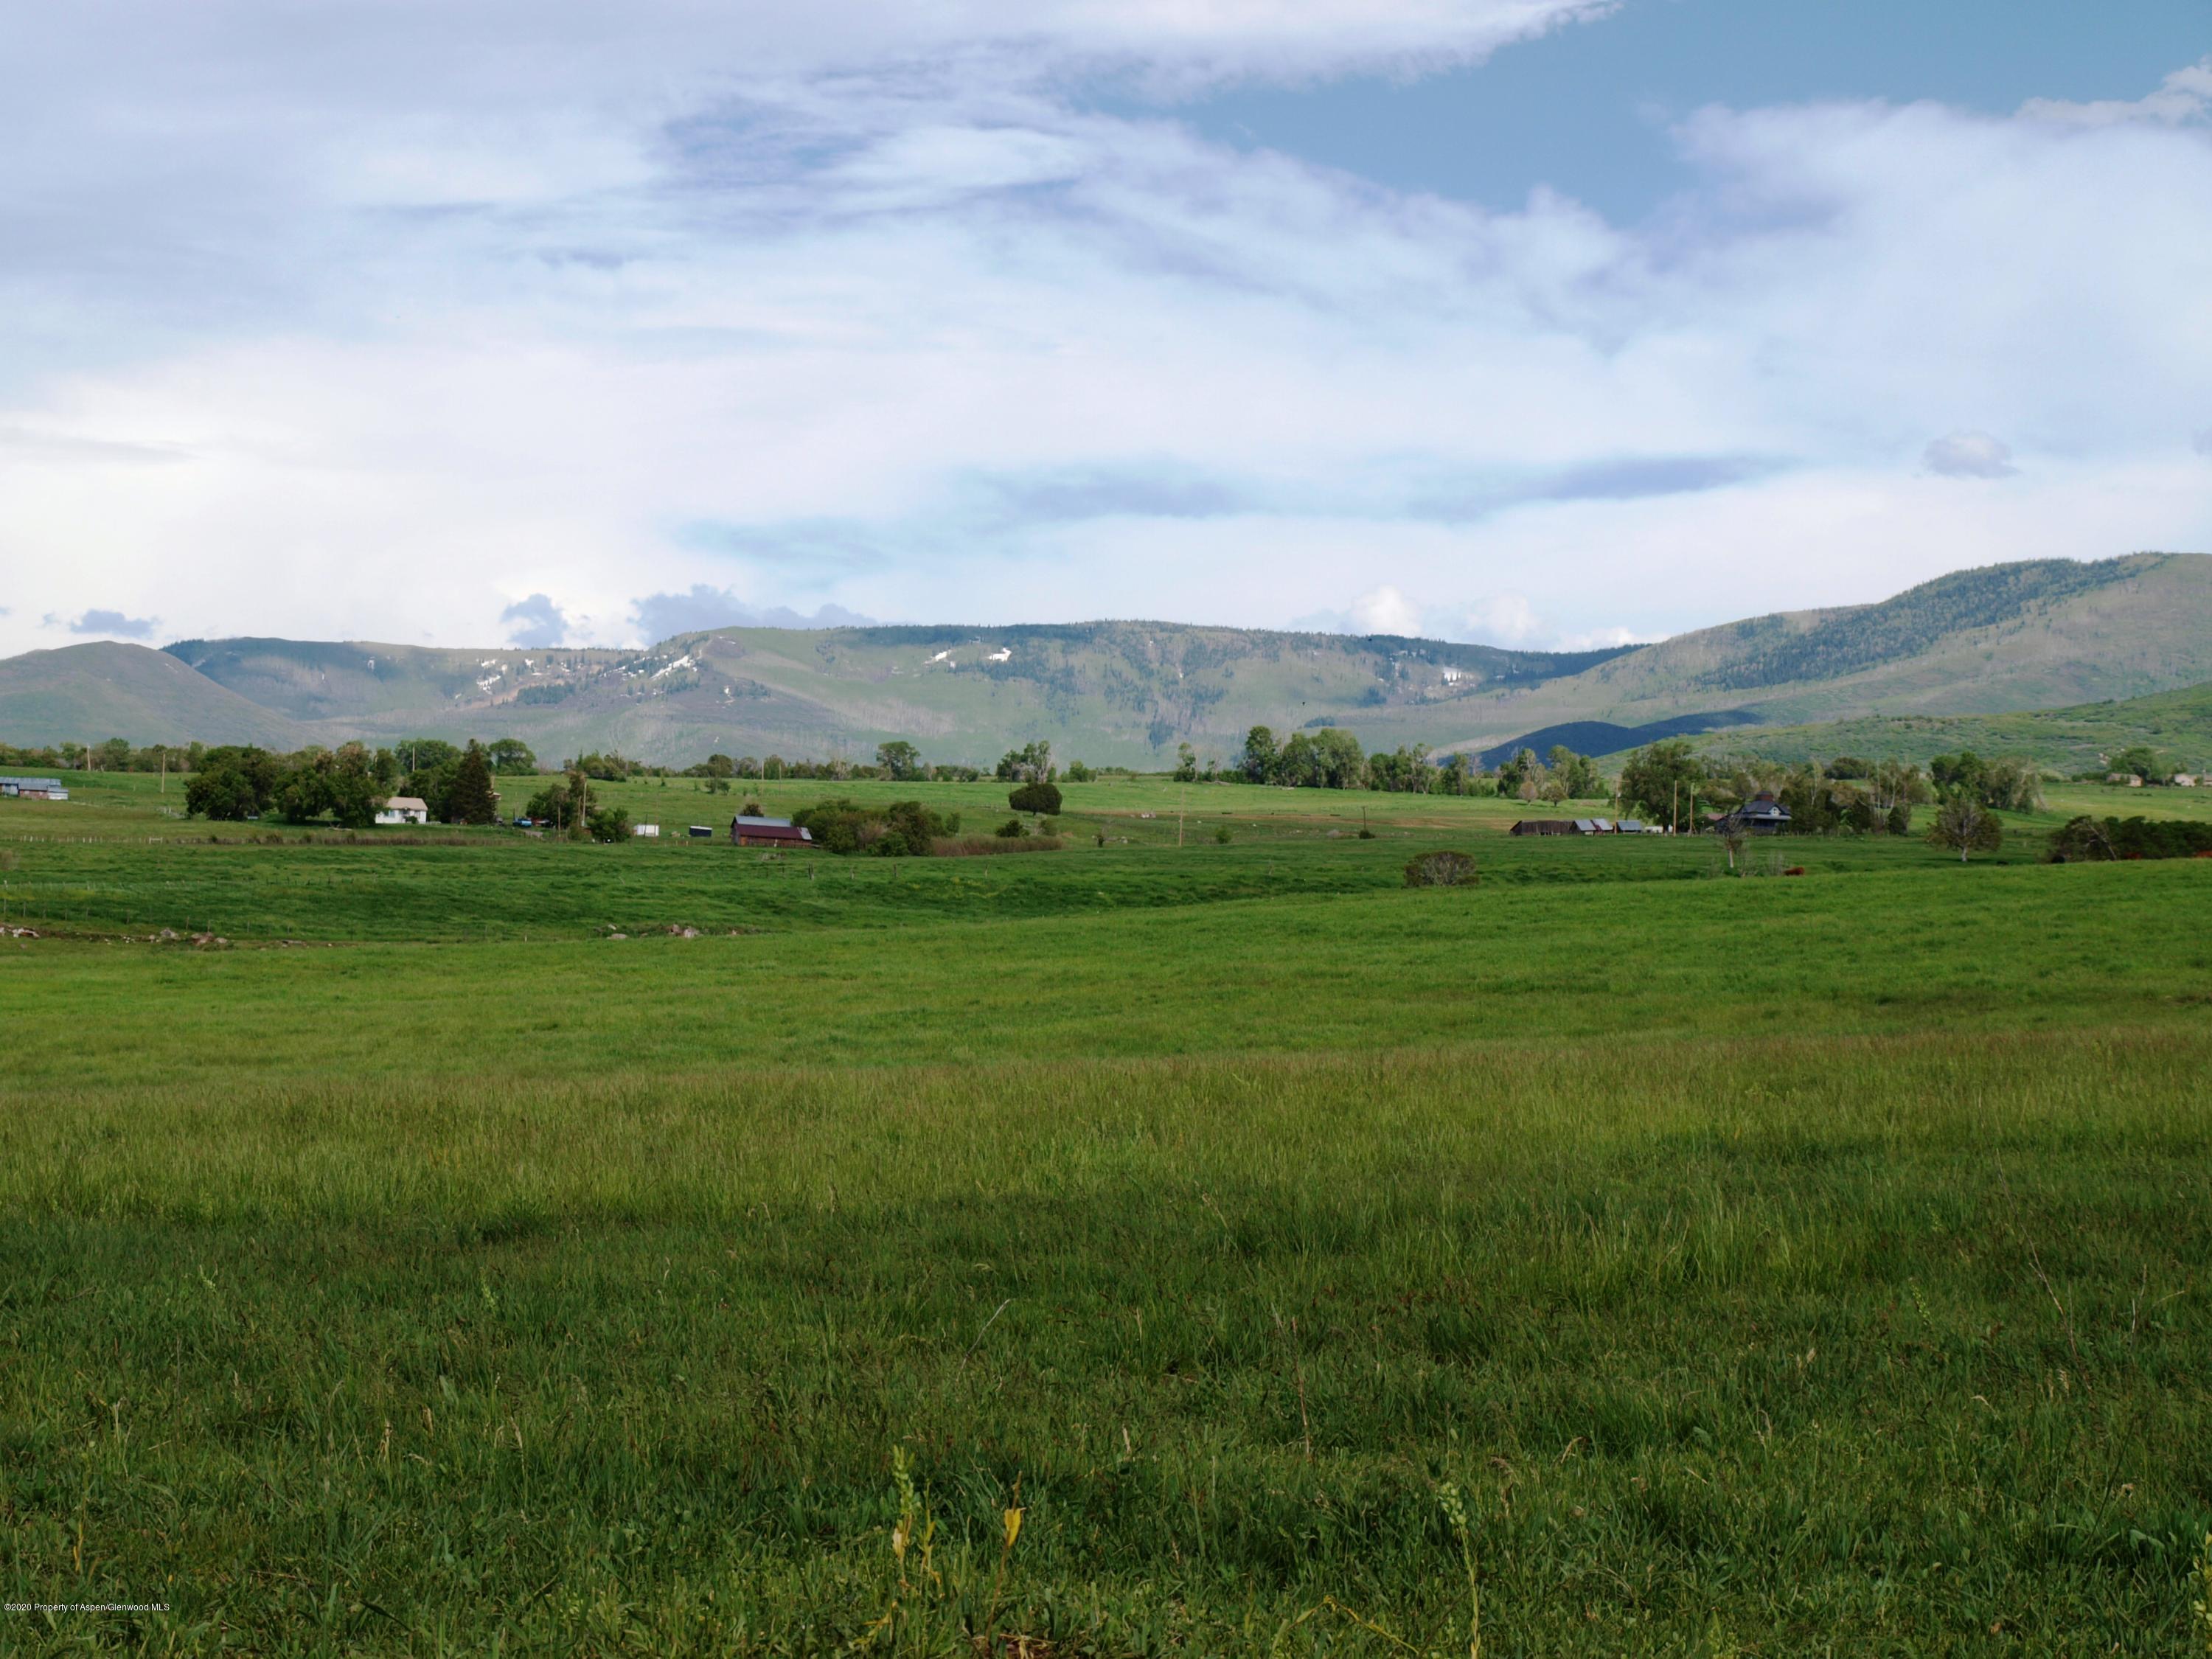 a view of grassy field with mountain